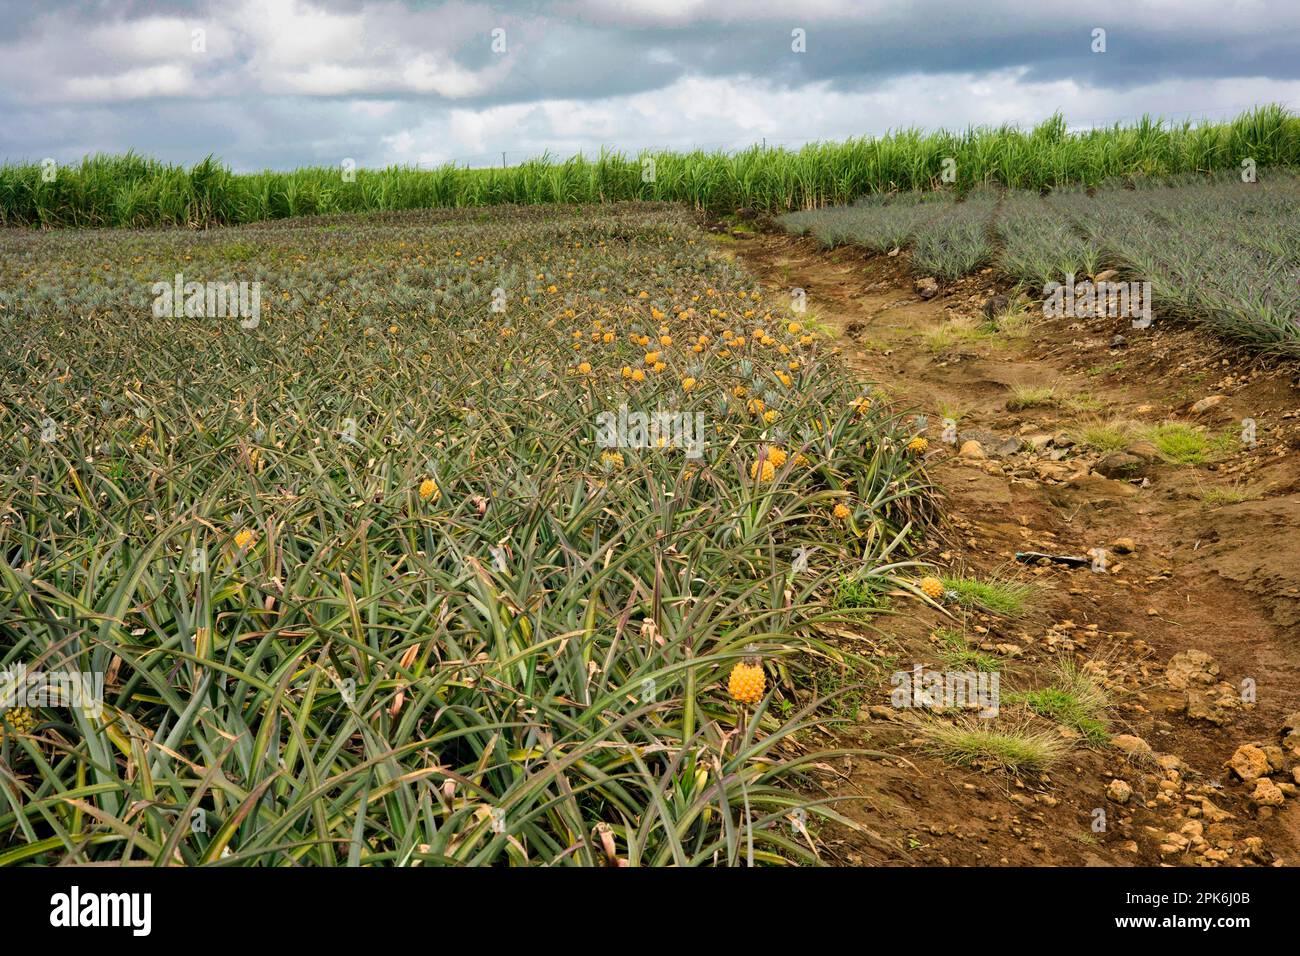 Pineapple plantation with ripe fruit, in the background a field with sugar cane, Mauritius Stock Photo